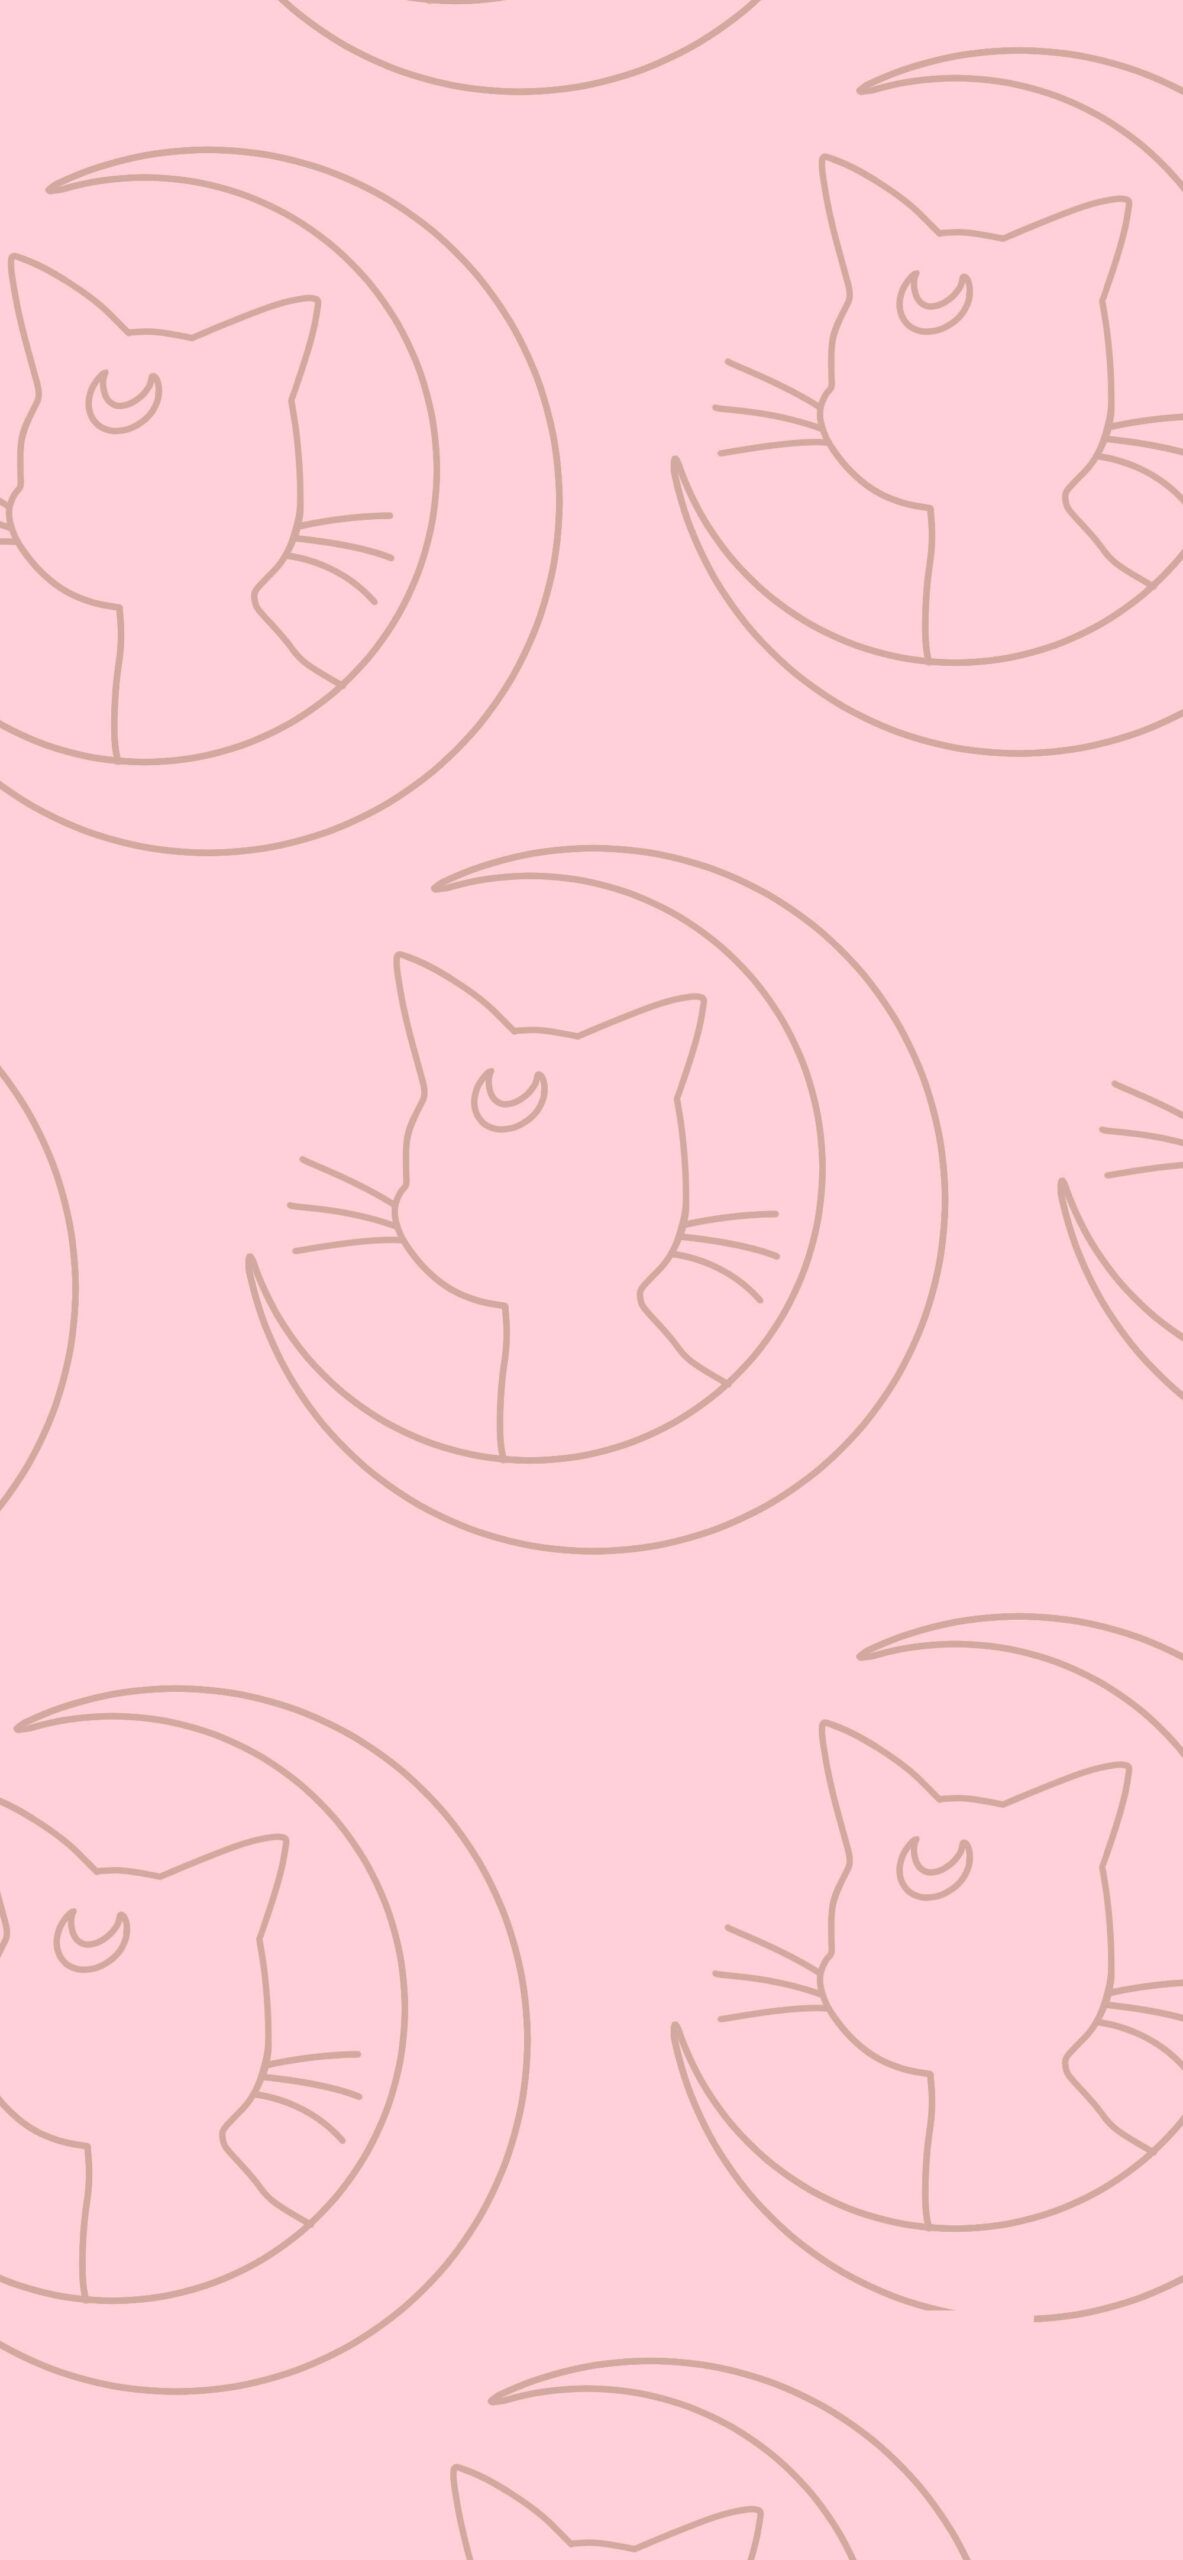 A pink background with cats and the moon - Moon, Sailor Moon